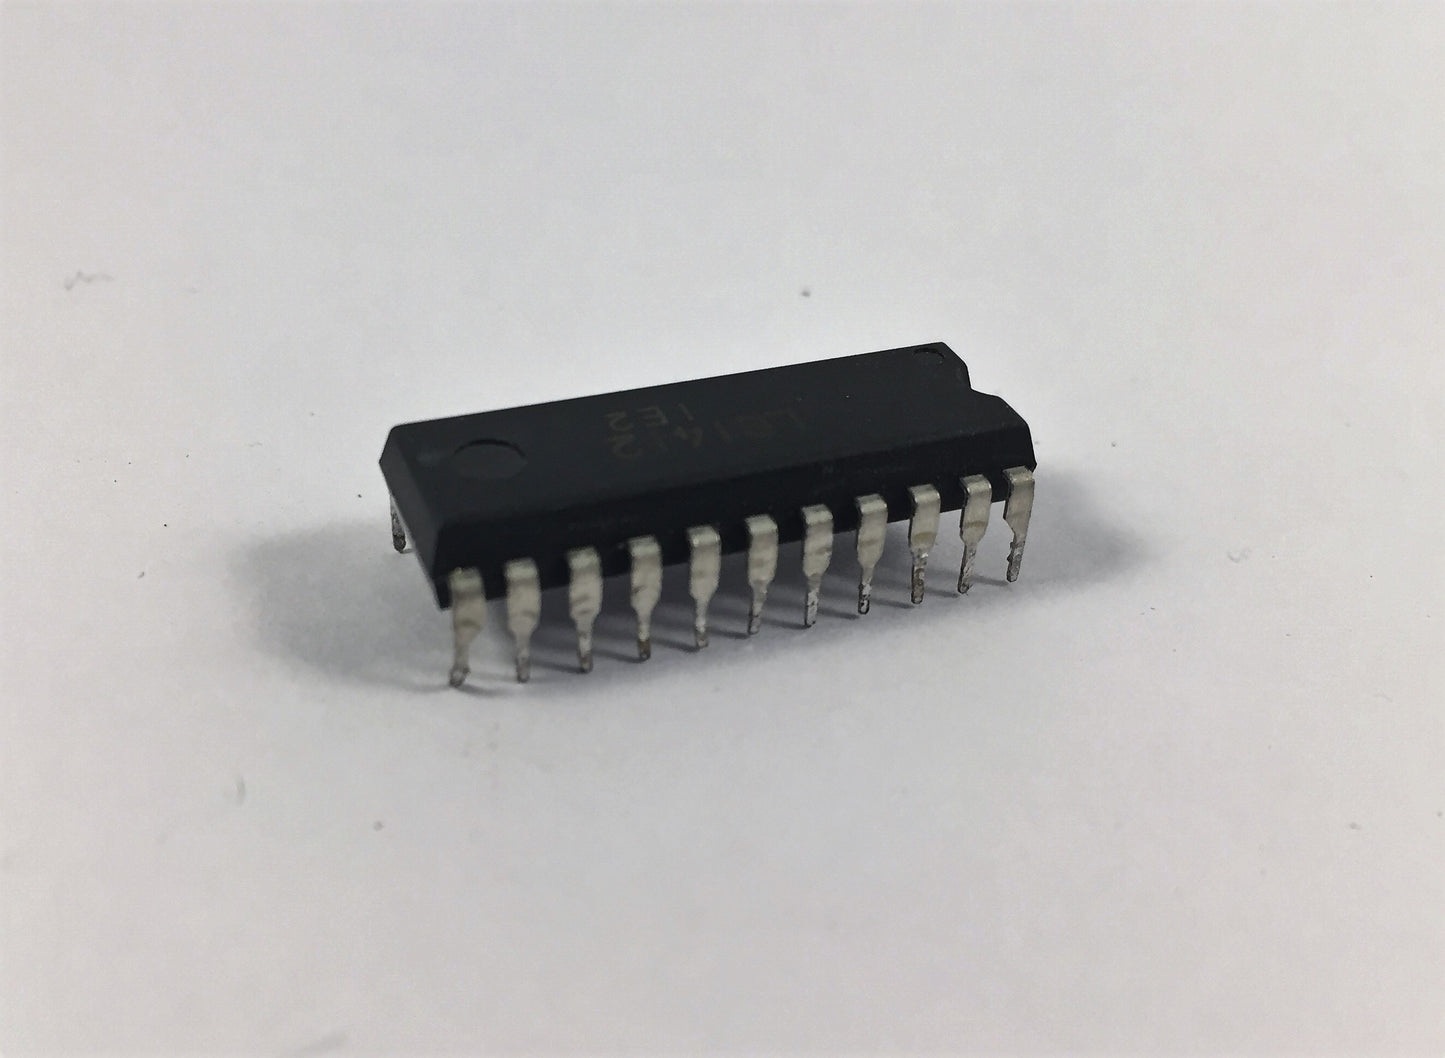 LB1412 led driver used pulled from boards pack of 2